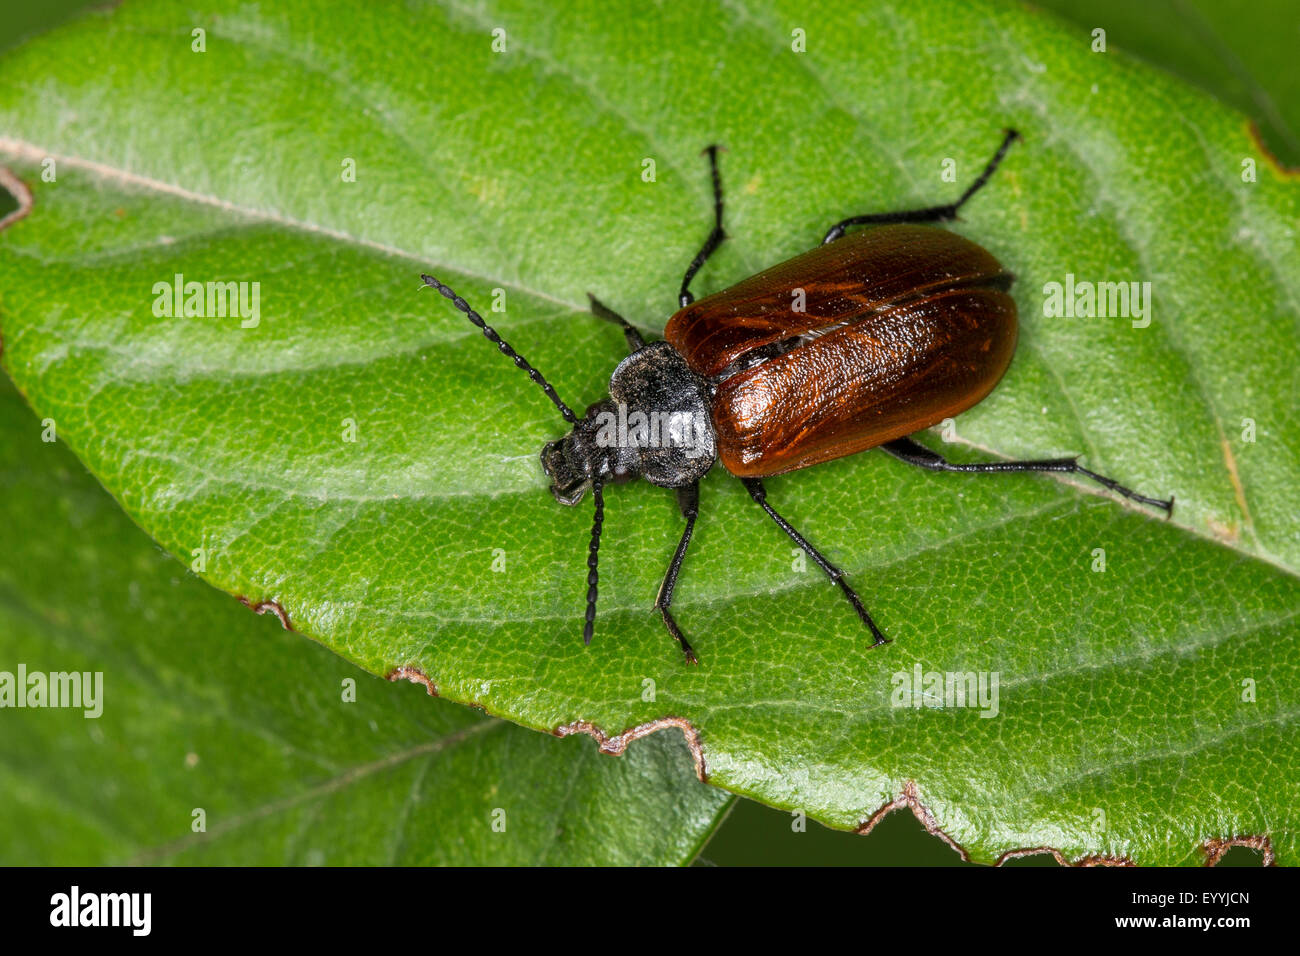 Comb-clawed beetle, Comb clawed beetle (Omophlus spec., Odontomophlus spec.), sitting on a leaf, Germany Stock Photo